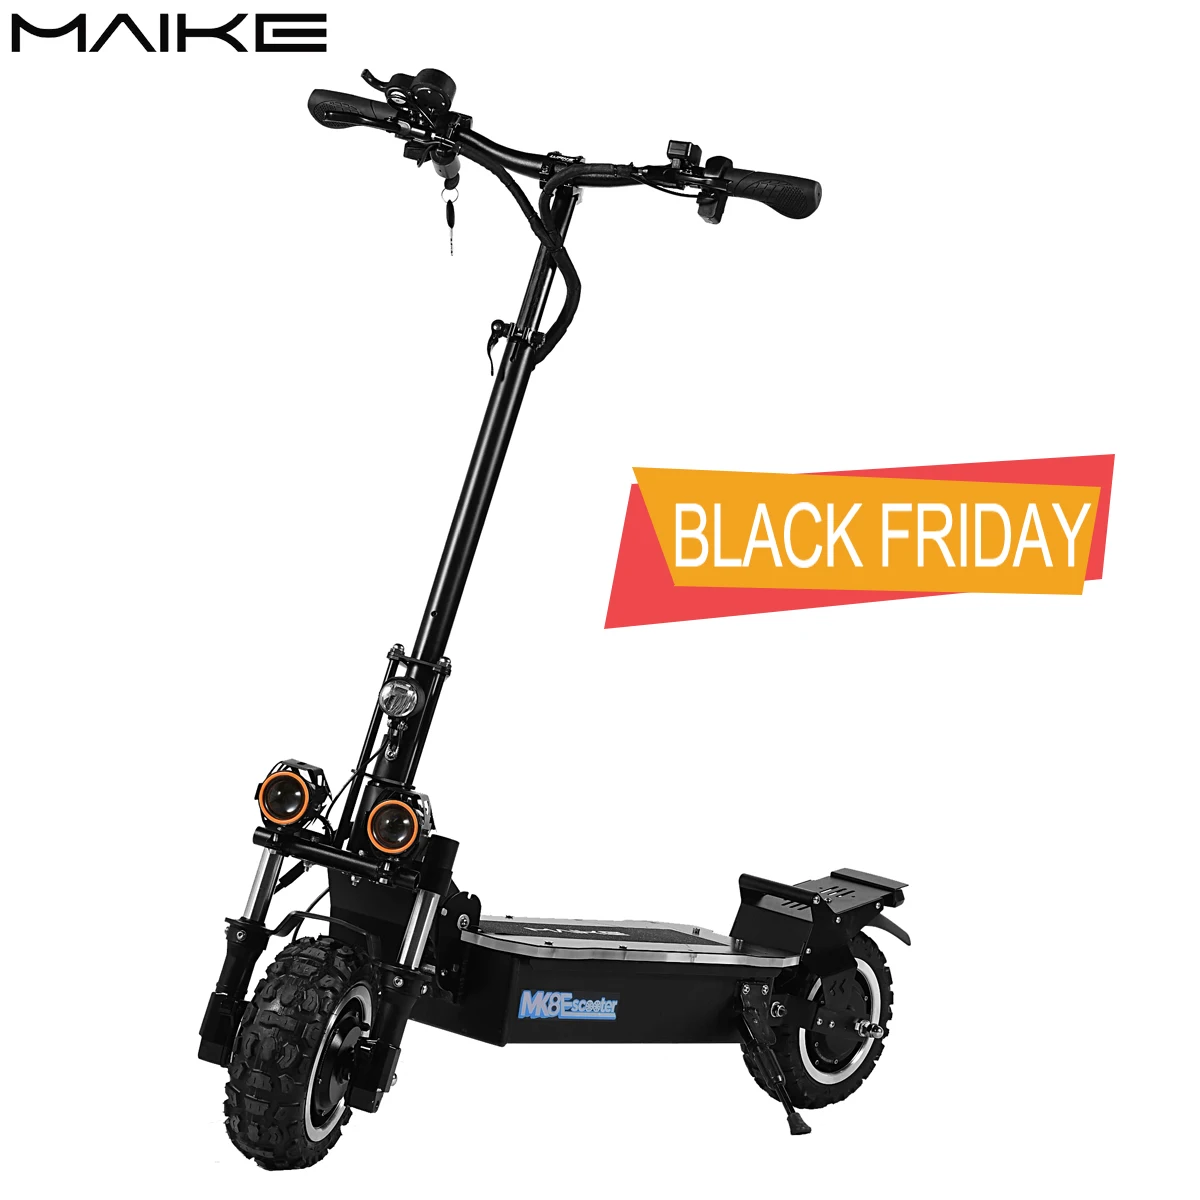 

High Quality Wholesale maike mk8 off road scooter electric adults 5000w dual hub motor high speed electric scooter europe